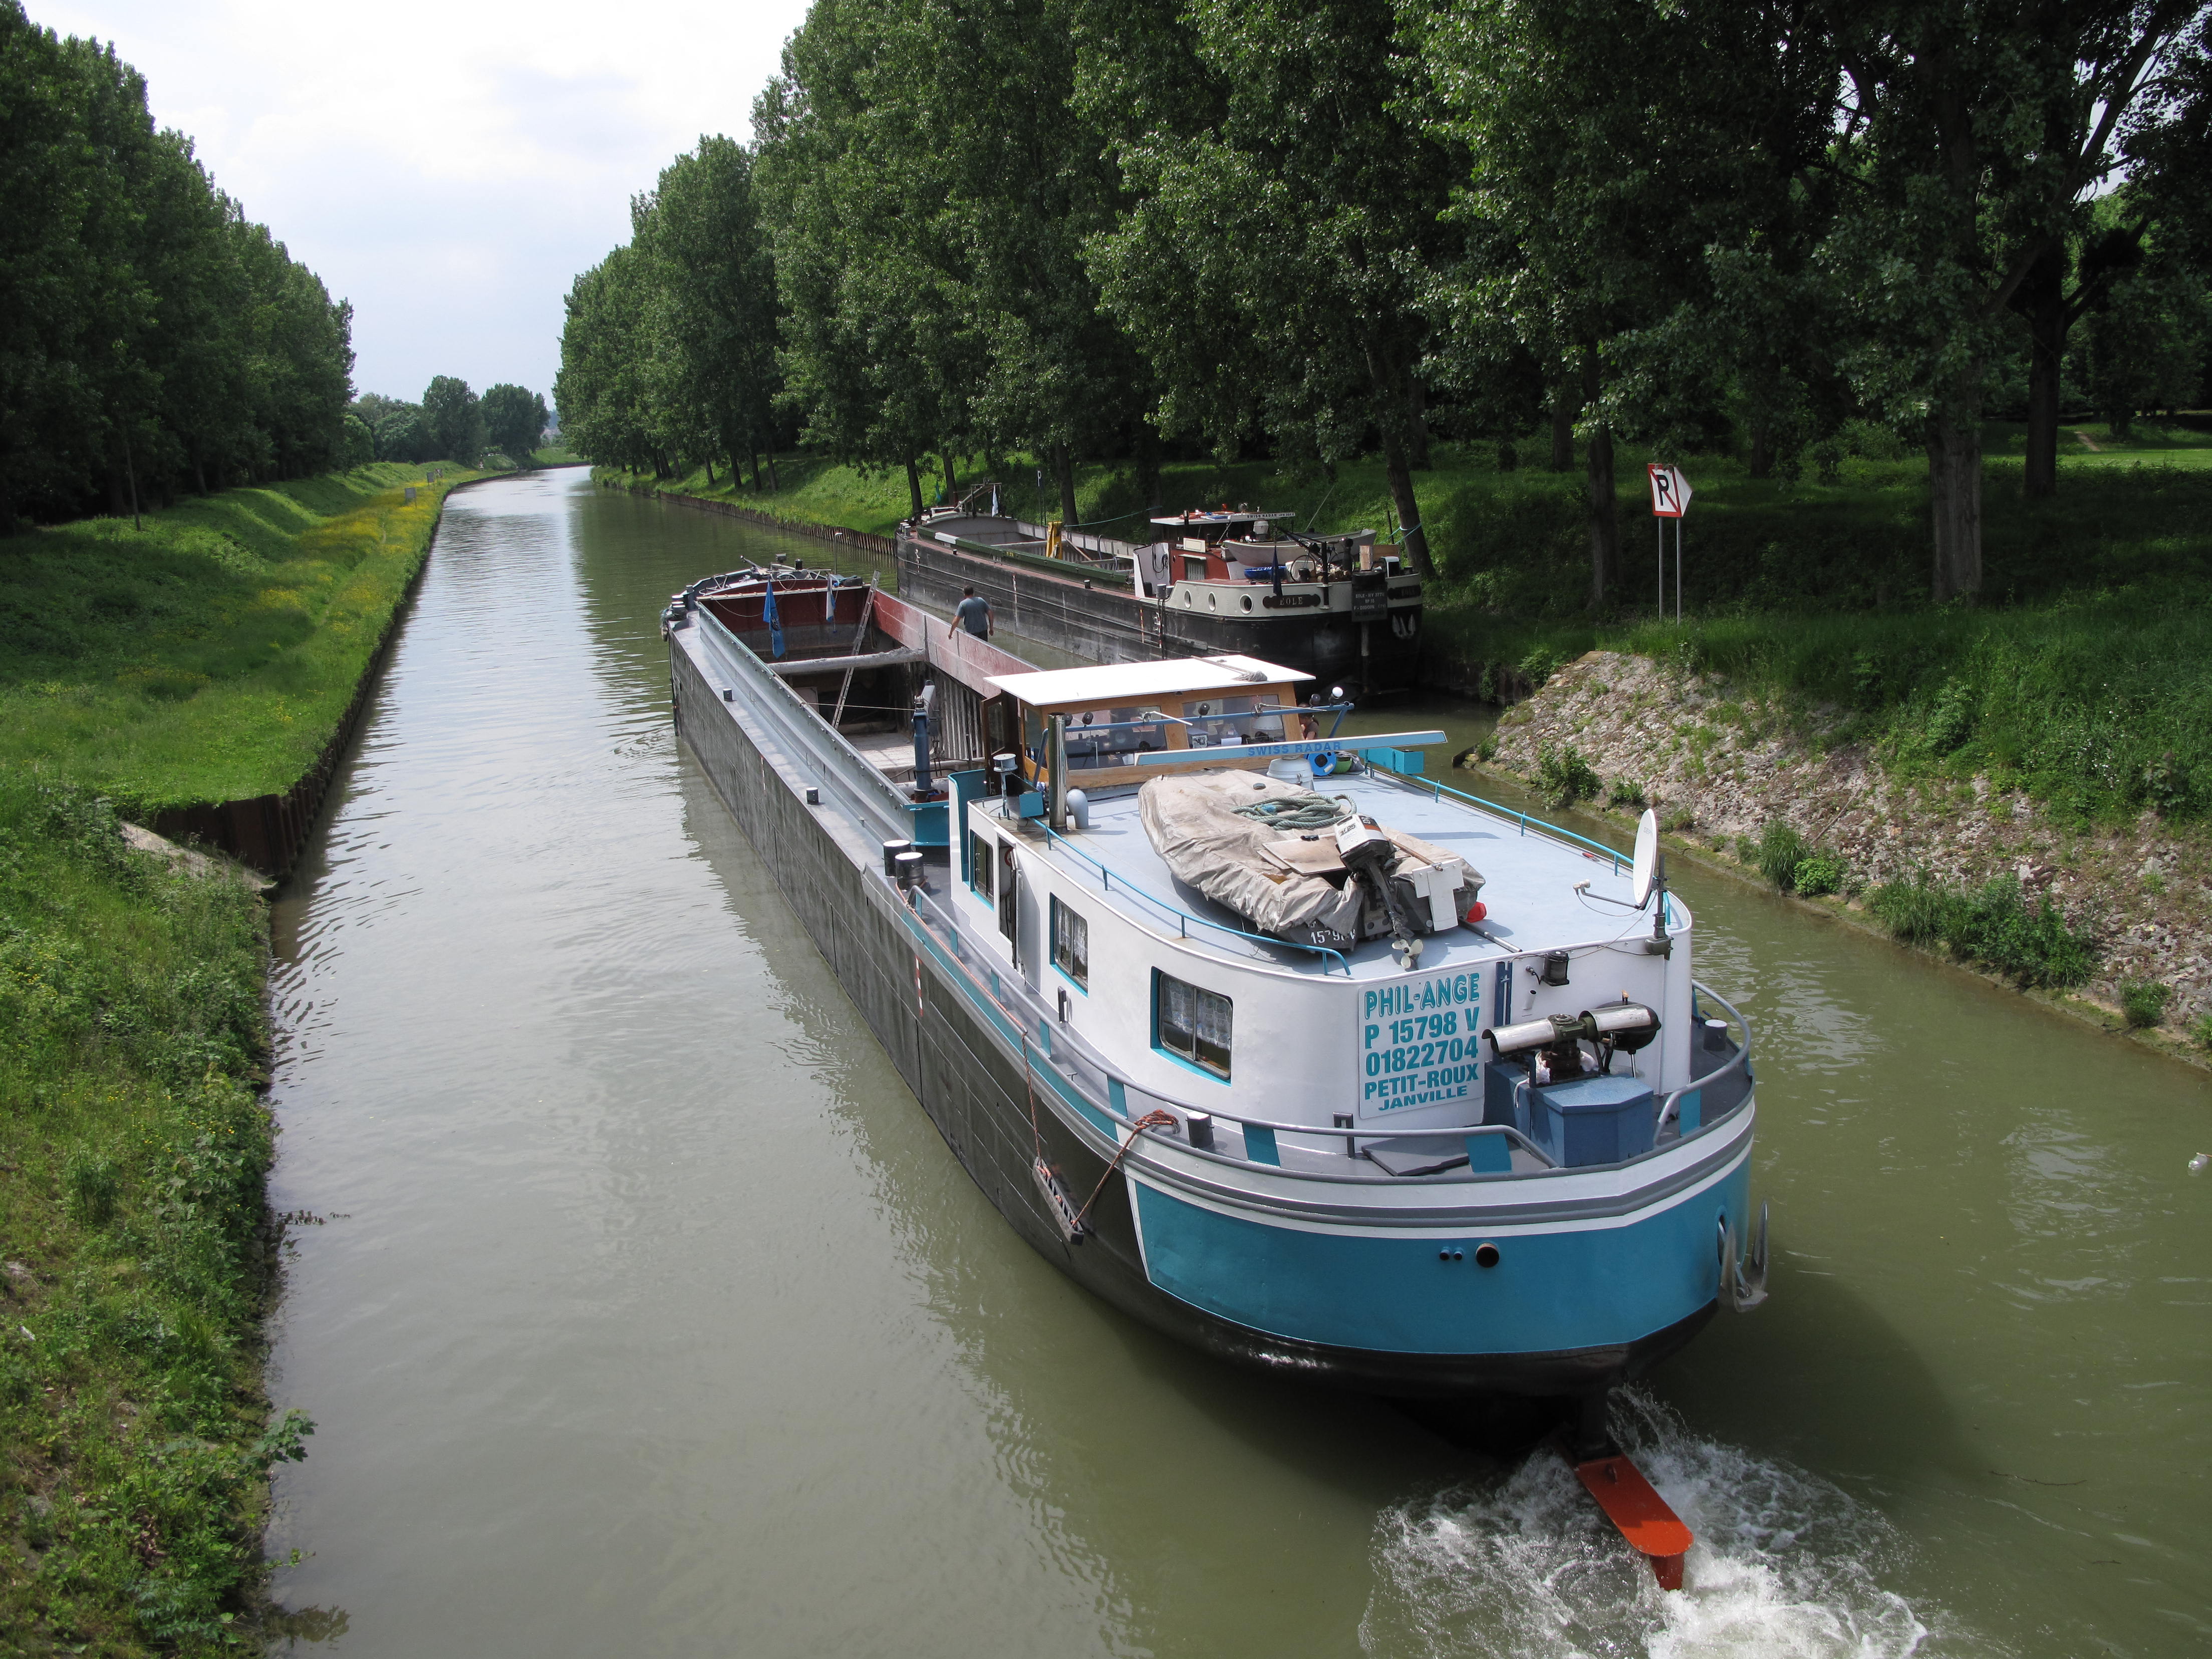 Vaires canal